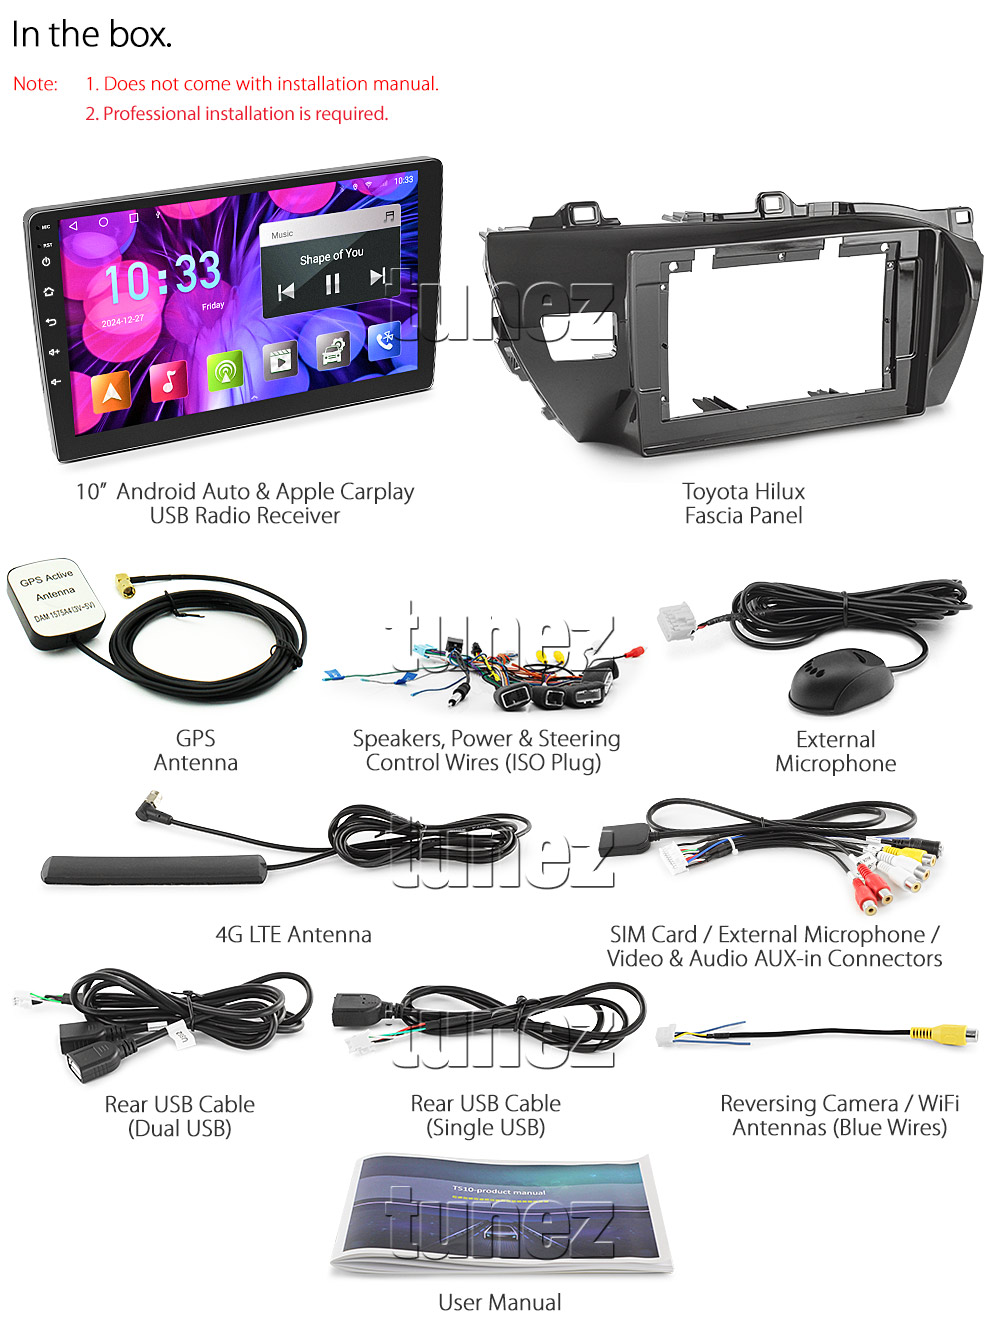 TH01AND GPS Aftermarket Toyota Hilux 2015 2016 2017 2018 2019 2020 2021 SR SR5 Workmate Rogue Rugged X chassis 8th generation gen GUN1 AN120 AN130 10-inch touchscreen Universal Double DIN Latest Australia UK European USA Original CarPlay Android Auto 10 Car USB player radio stereo 4G LTE WiFi head unit details Aftermarket External and Internal Microphone Bluetooth Europe Sat Nav Navi Plug and Play ISO Plug Wiring Harness Matching Fascia Kit Facia Free Reversing Camera Album Art ID3 Tag RMVB MP3 MP4 AVI MKV Full High Definition FHD 1080p DAB+ Digital Radio DAB + Connects2 CTSIZ001.2